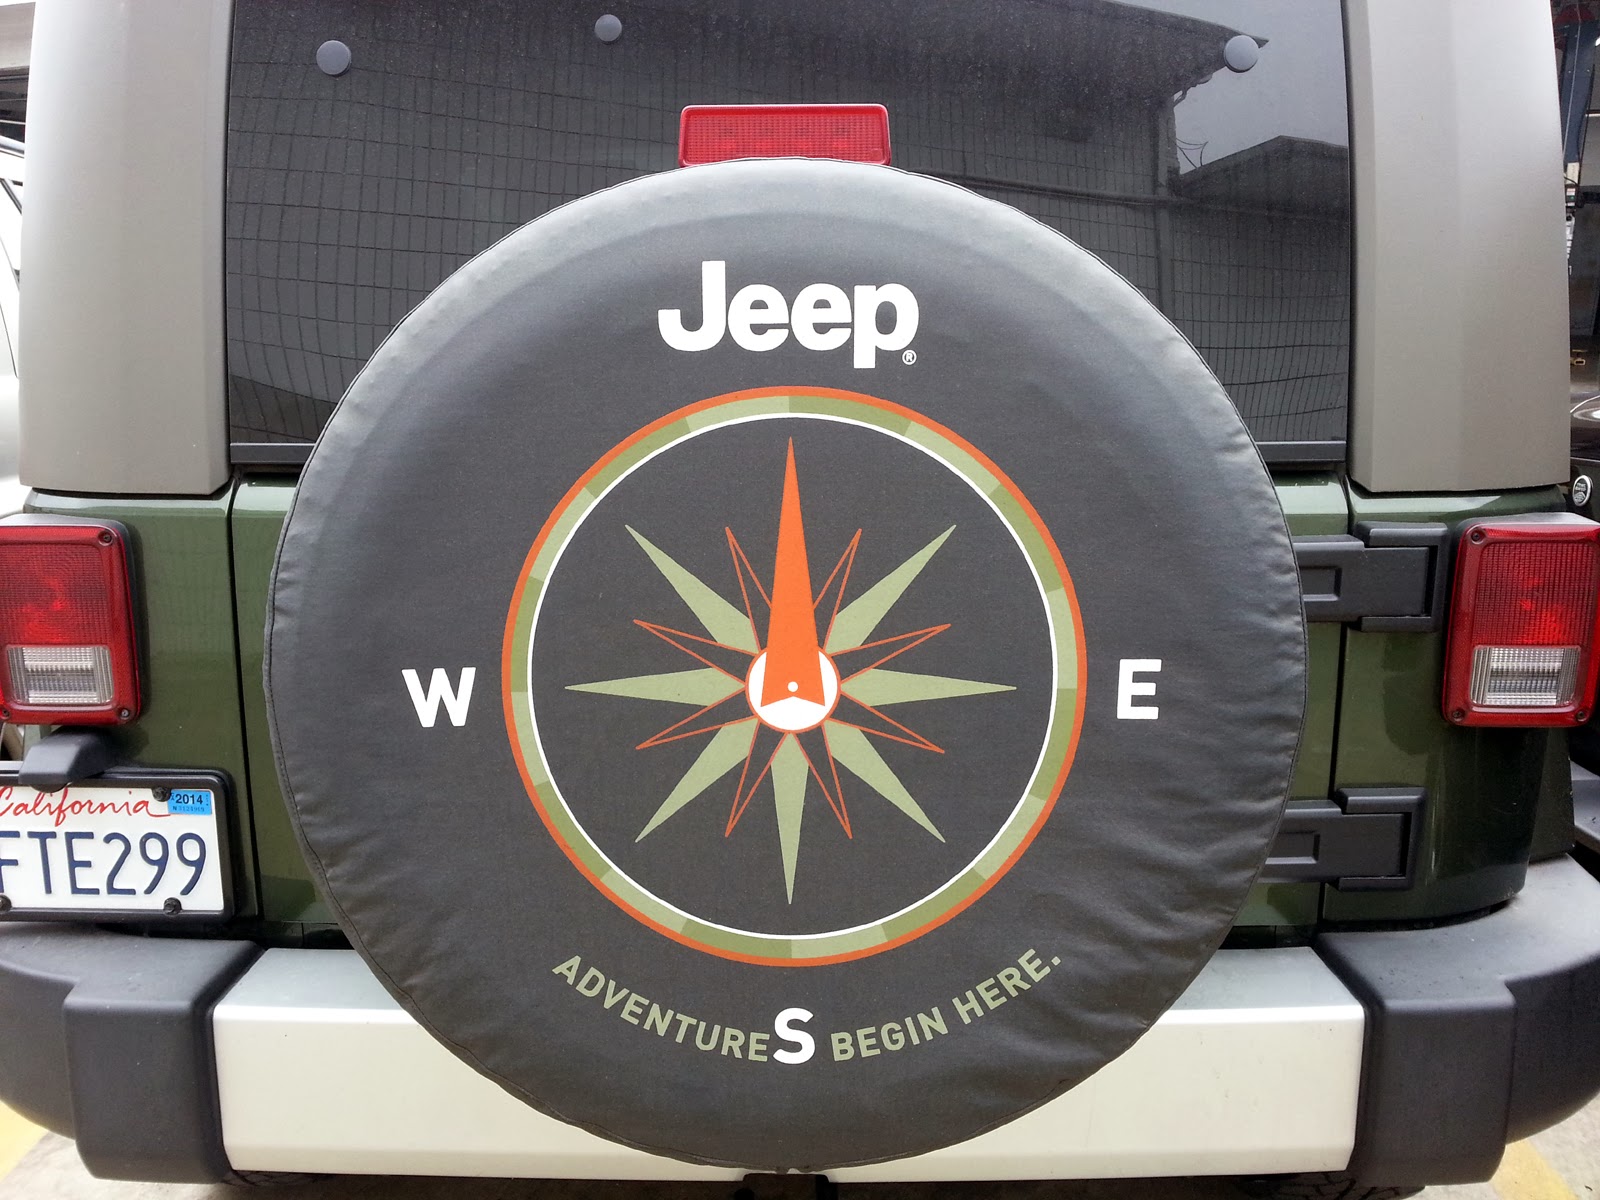 Cool tire covers for jeep #4